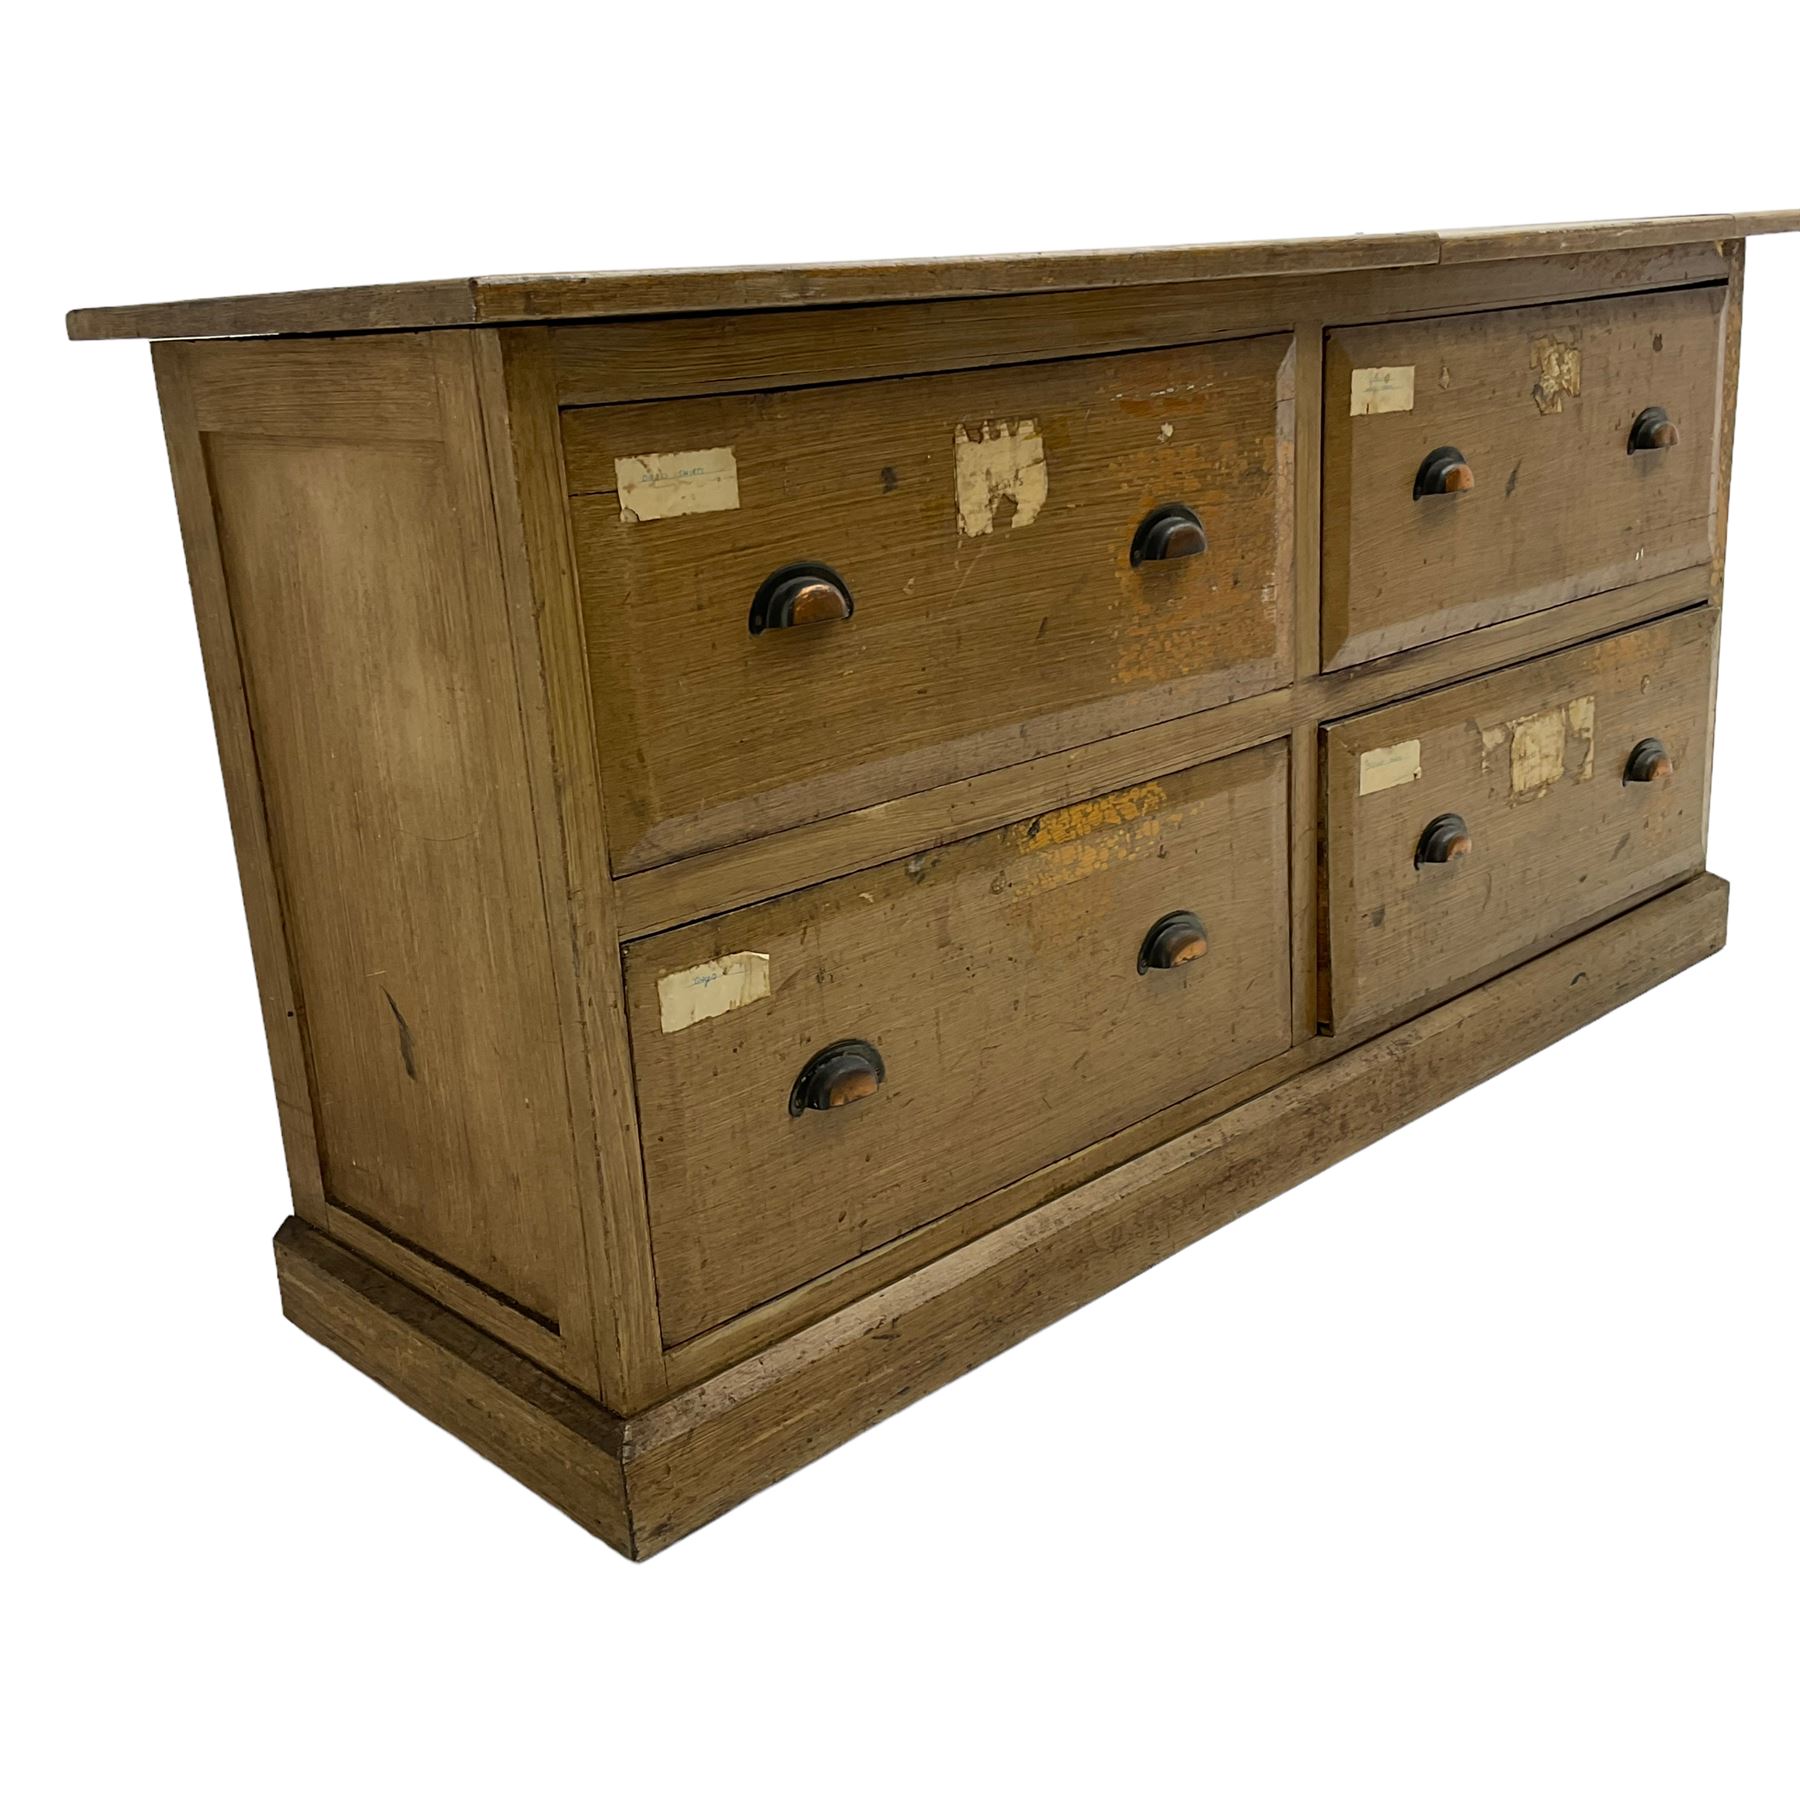 19th century rustic pine chest - Image 3 of 5